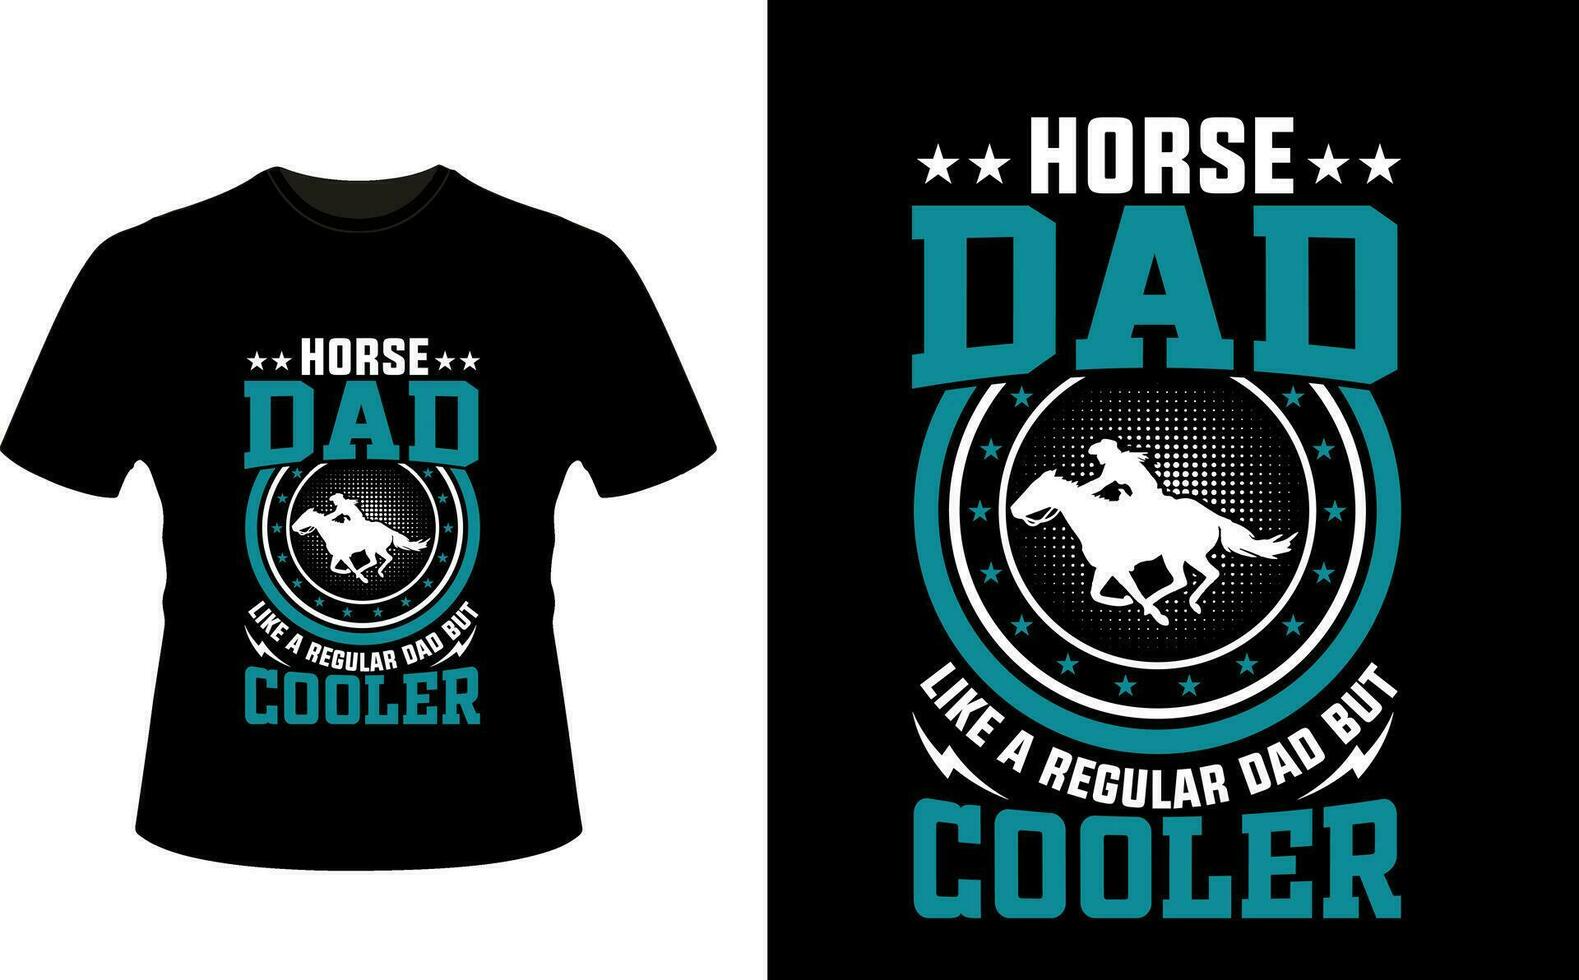 Horse Dad Like a Regular Dad But Cooler or dad papa tshirt design or Father day t shirt Design vector